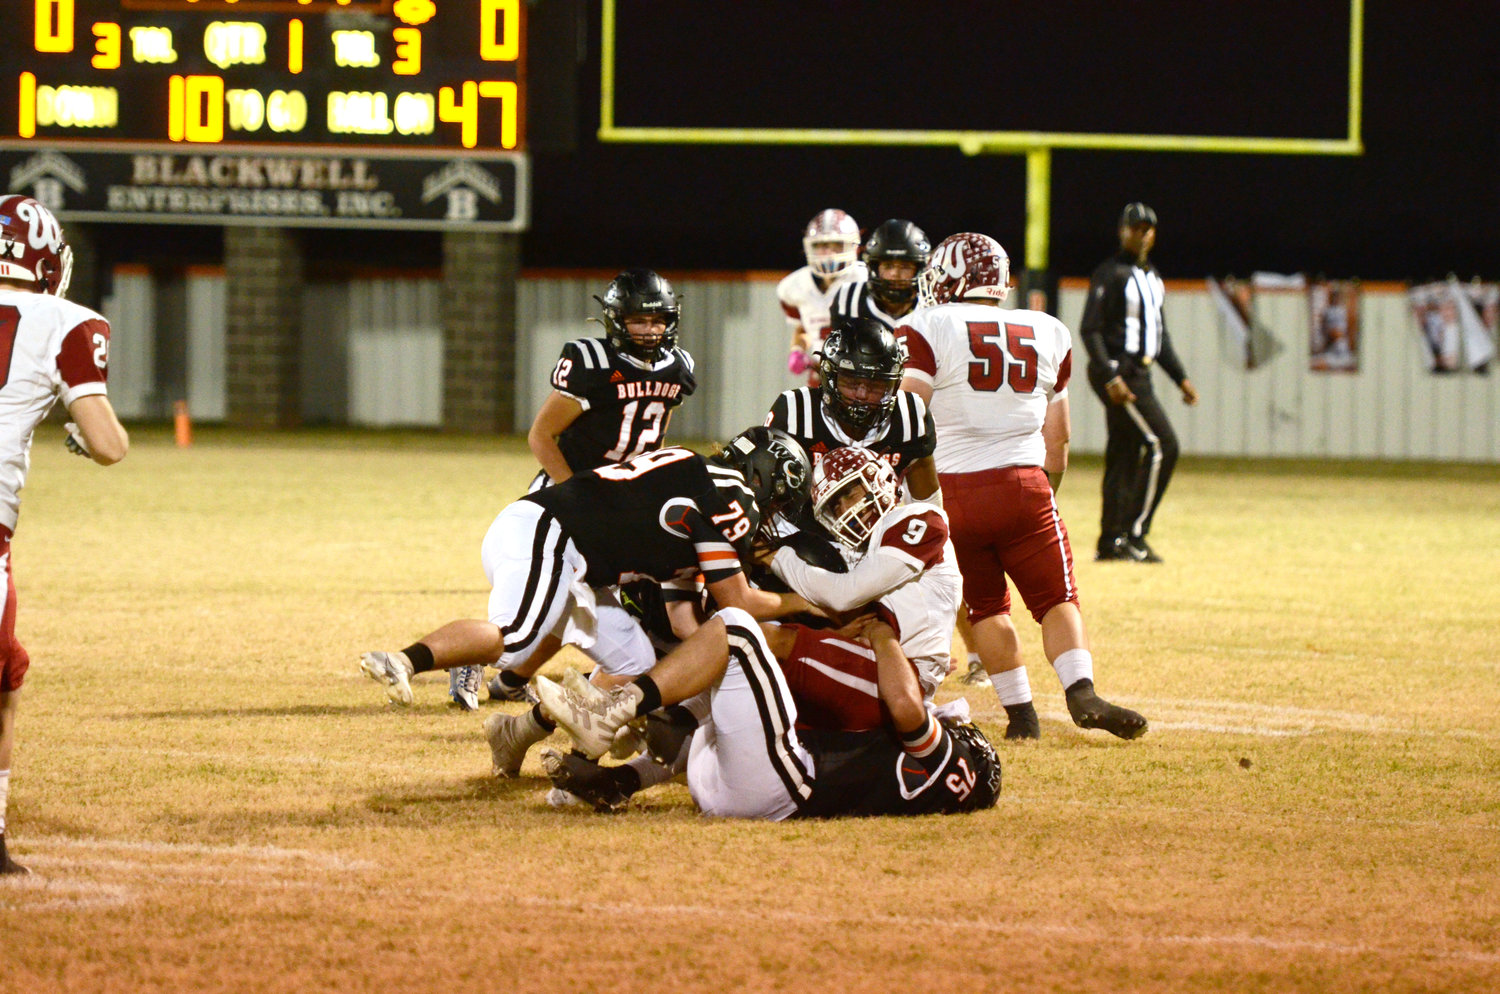 Three Wayne defenders, including Lane Jones (79), Casey Kane (75) and Taylen Bryant (9), converge on a Wynnewood ball carrier last Thursday night. Wayne’s season ended with the 35-6 loss to Wynnewood.